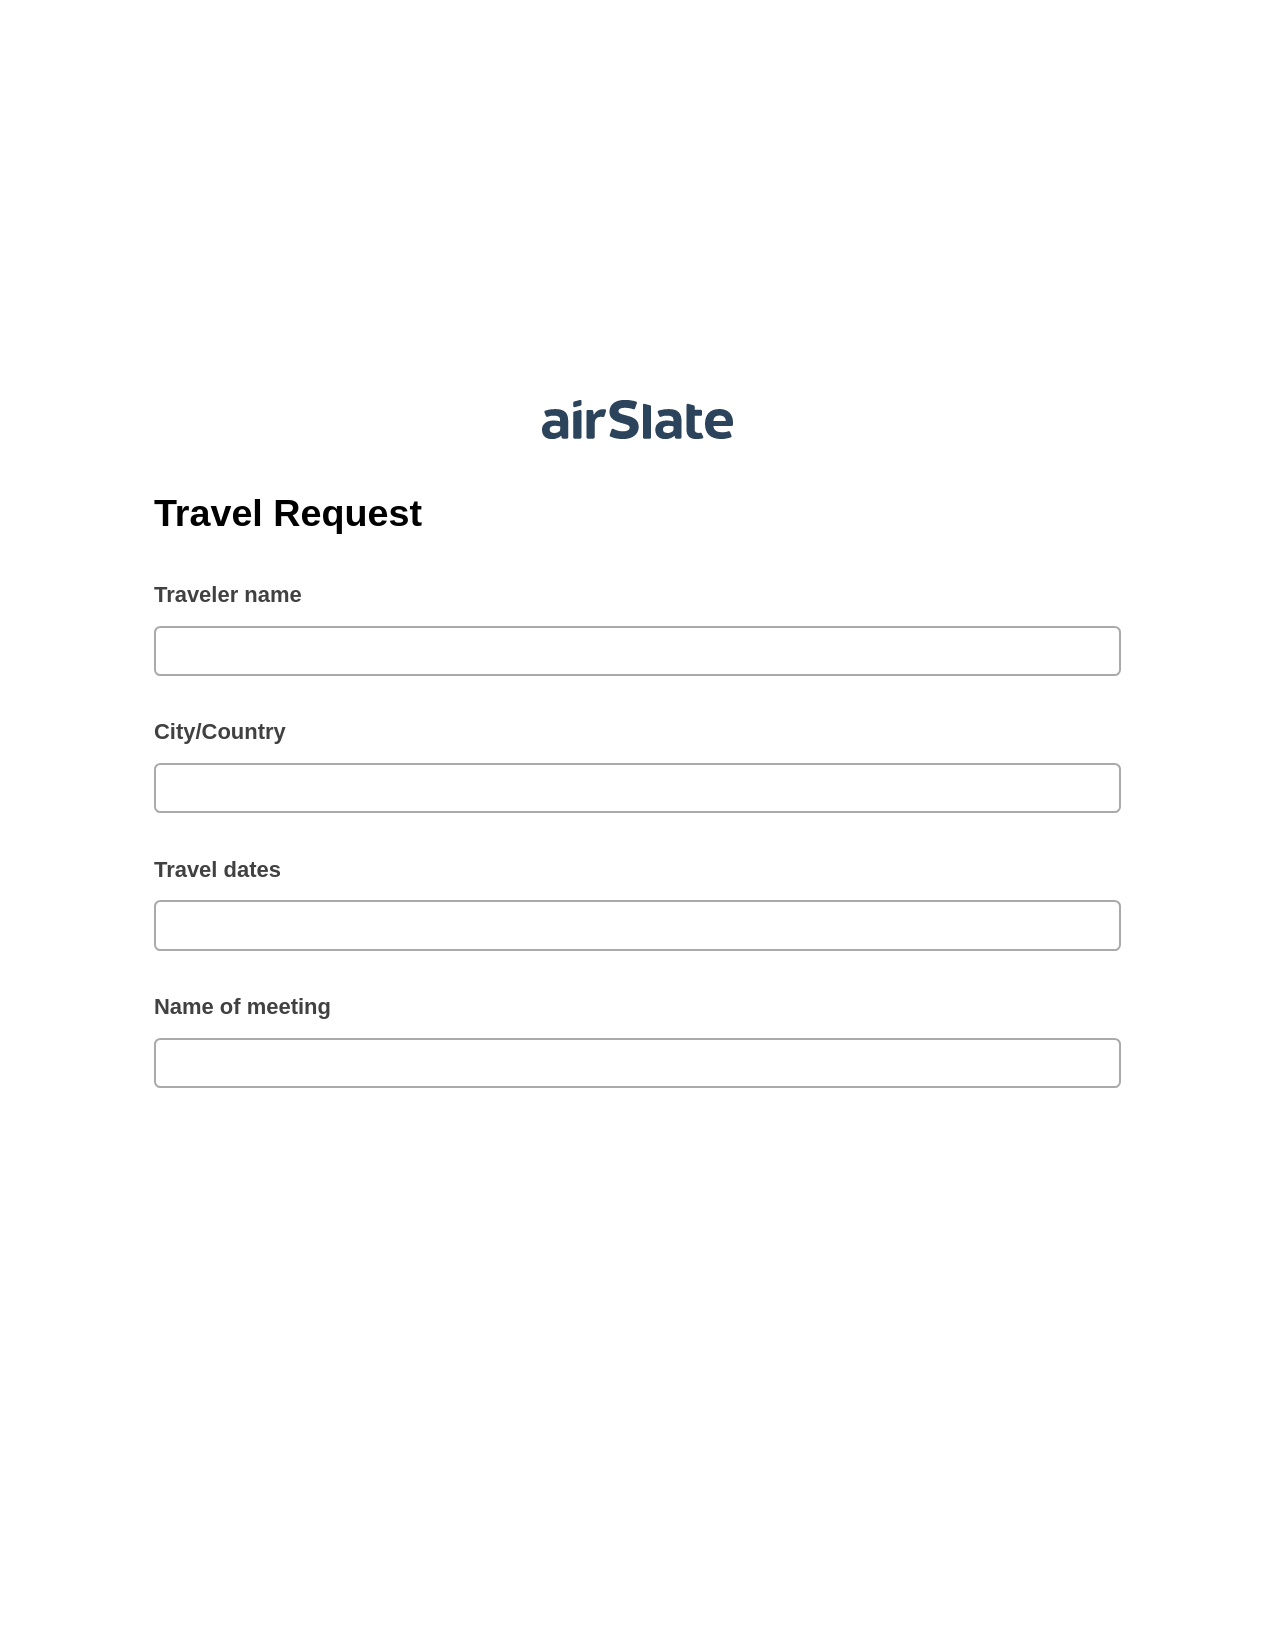 Multirole Travel Request Pre-fill Dropdown from Airtable, Jira Bot, Slack Two-Way Binding Bot